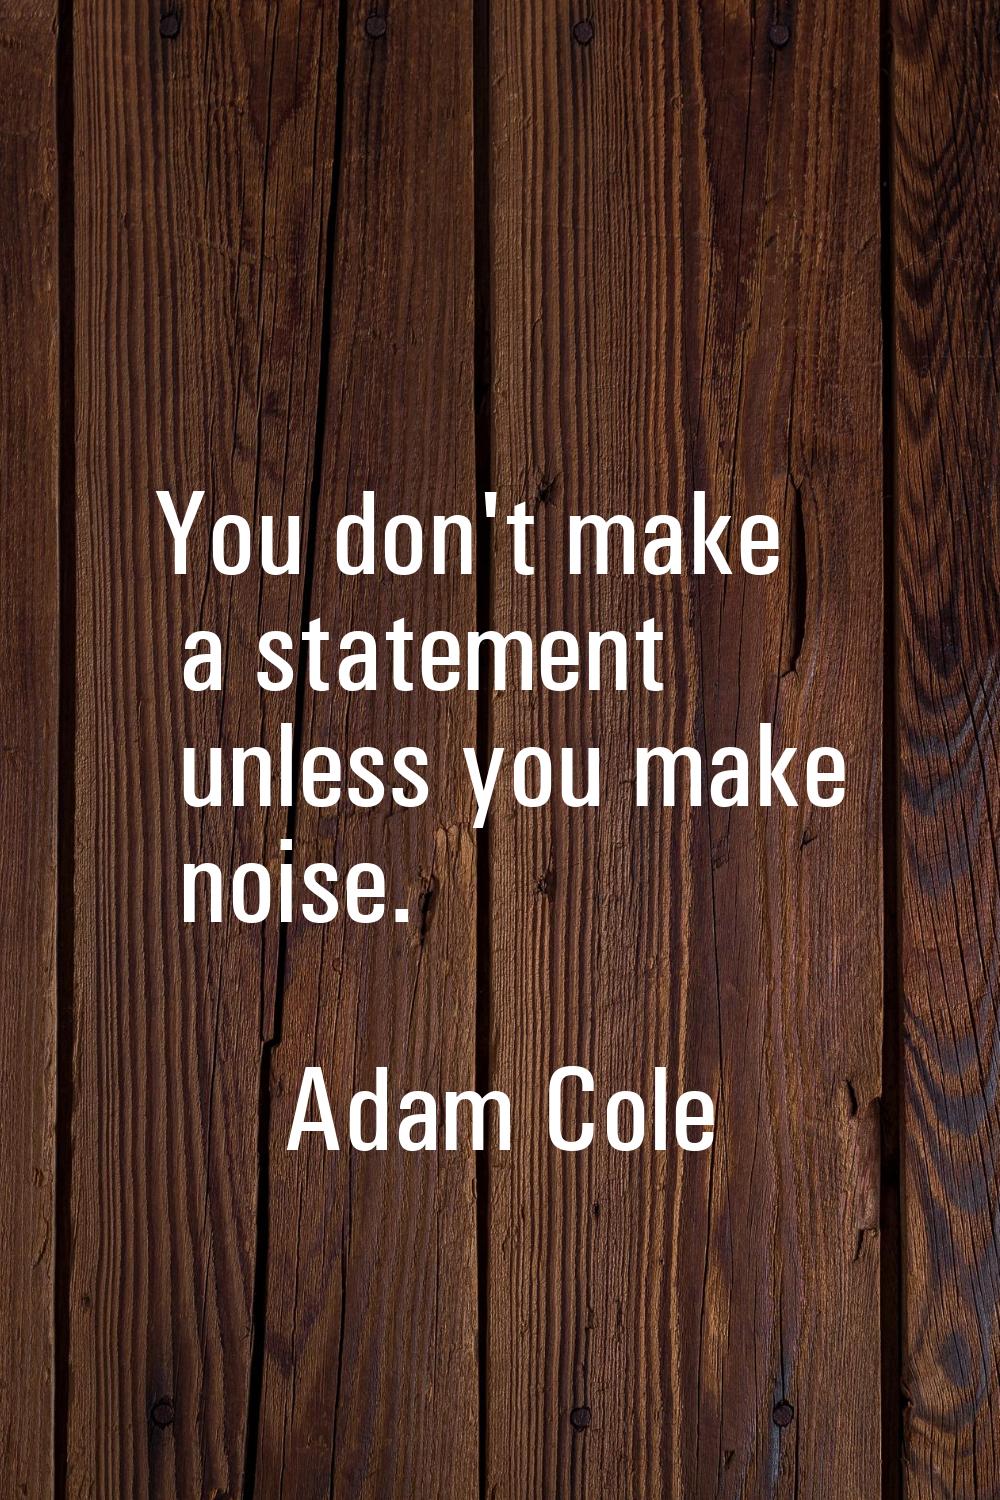 You don't make a statement unless you make noise.